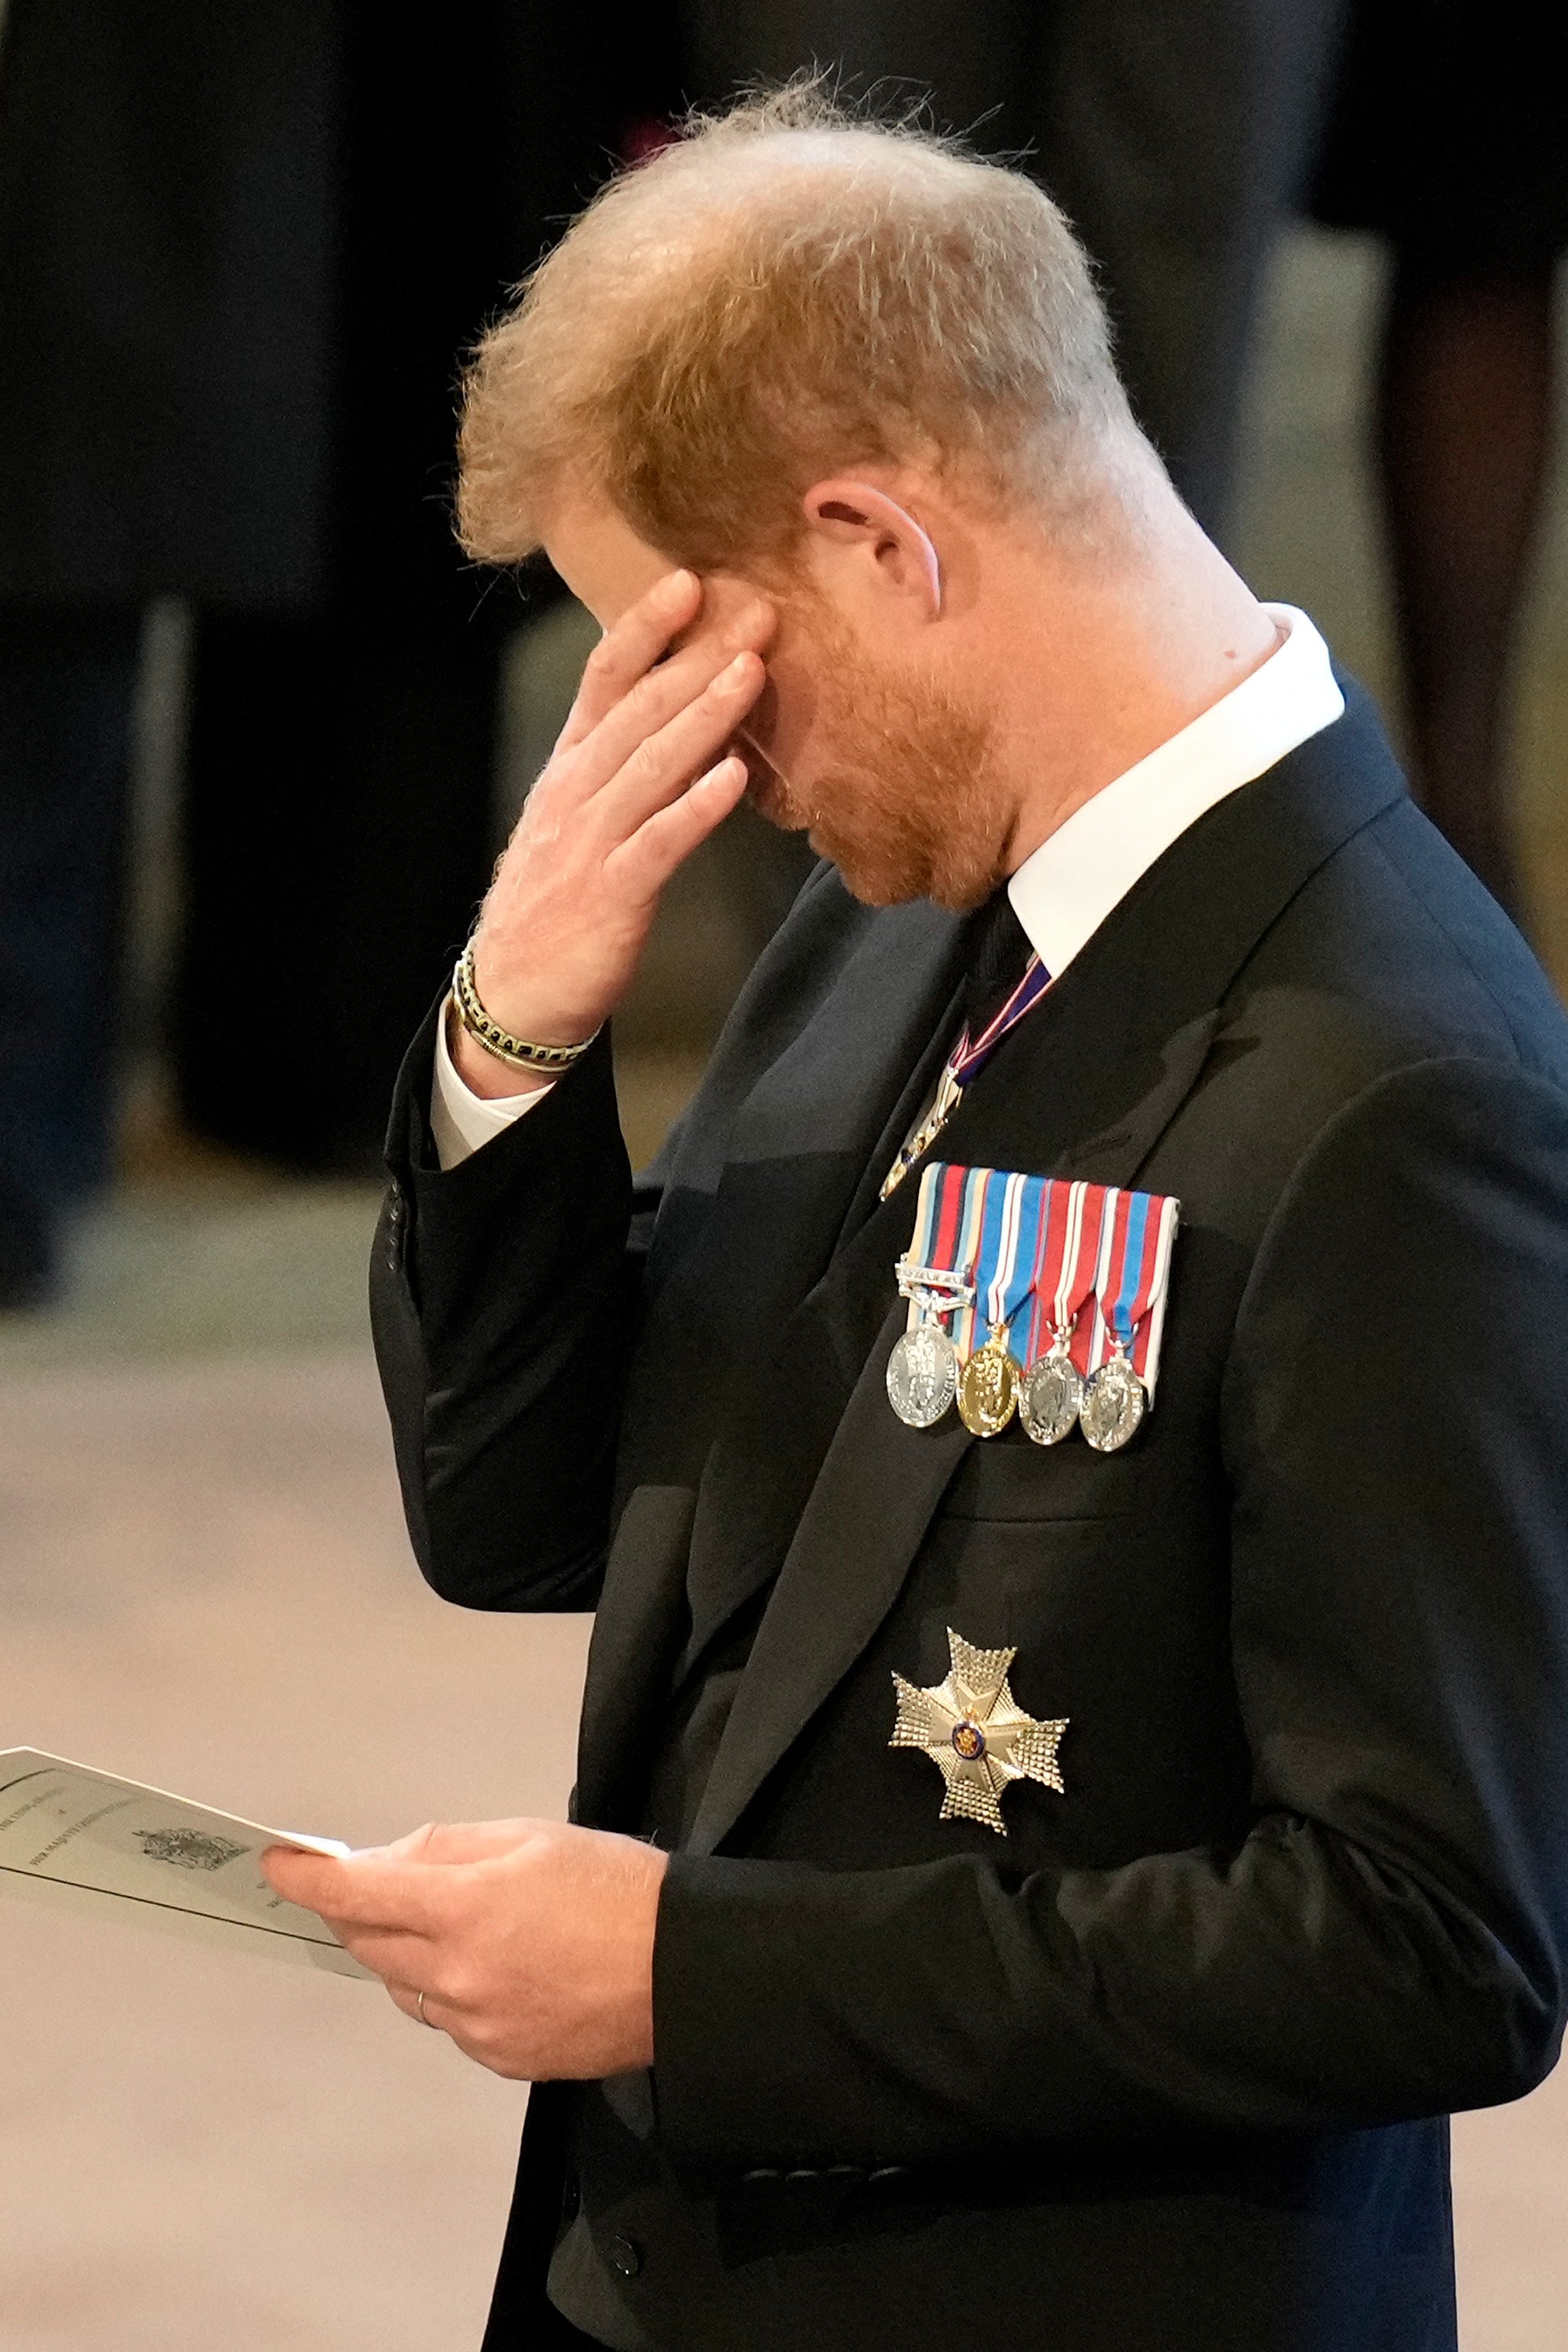 Britain's Prince Harry, Duke of Sussex at a service for the reception of Queen Elizabeth II's coffin inside Westminster Hall in London on September 14, 2022. | Source: Getty Images